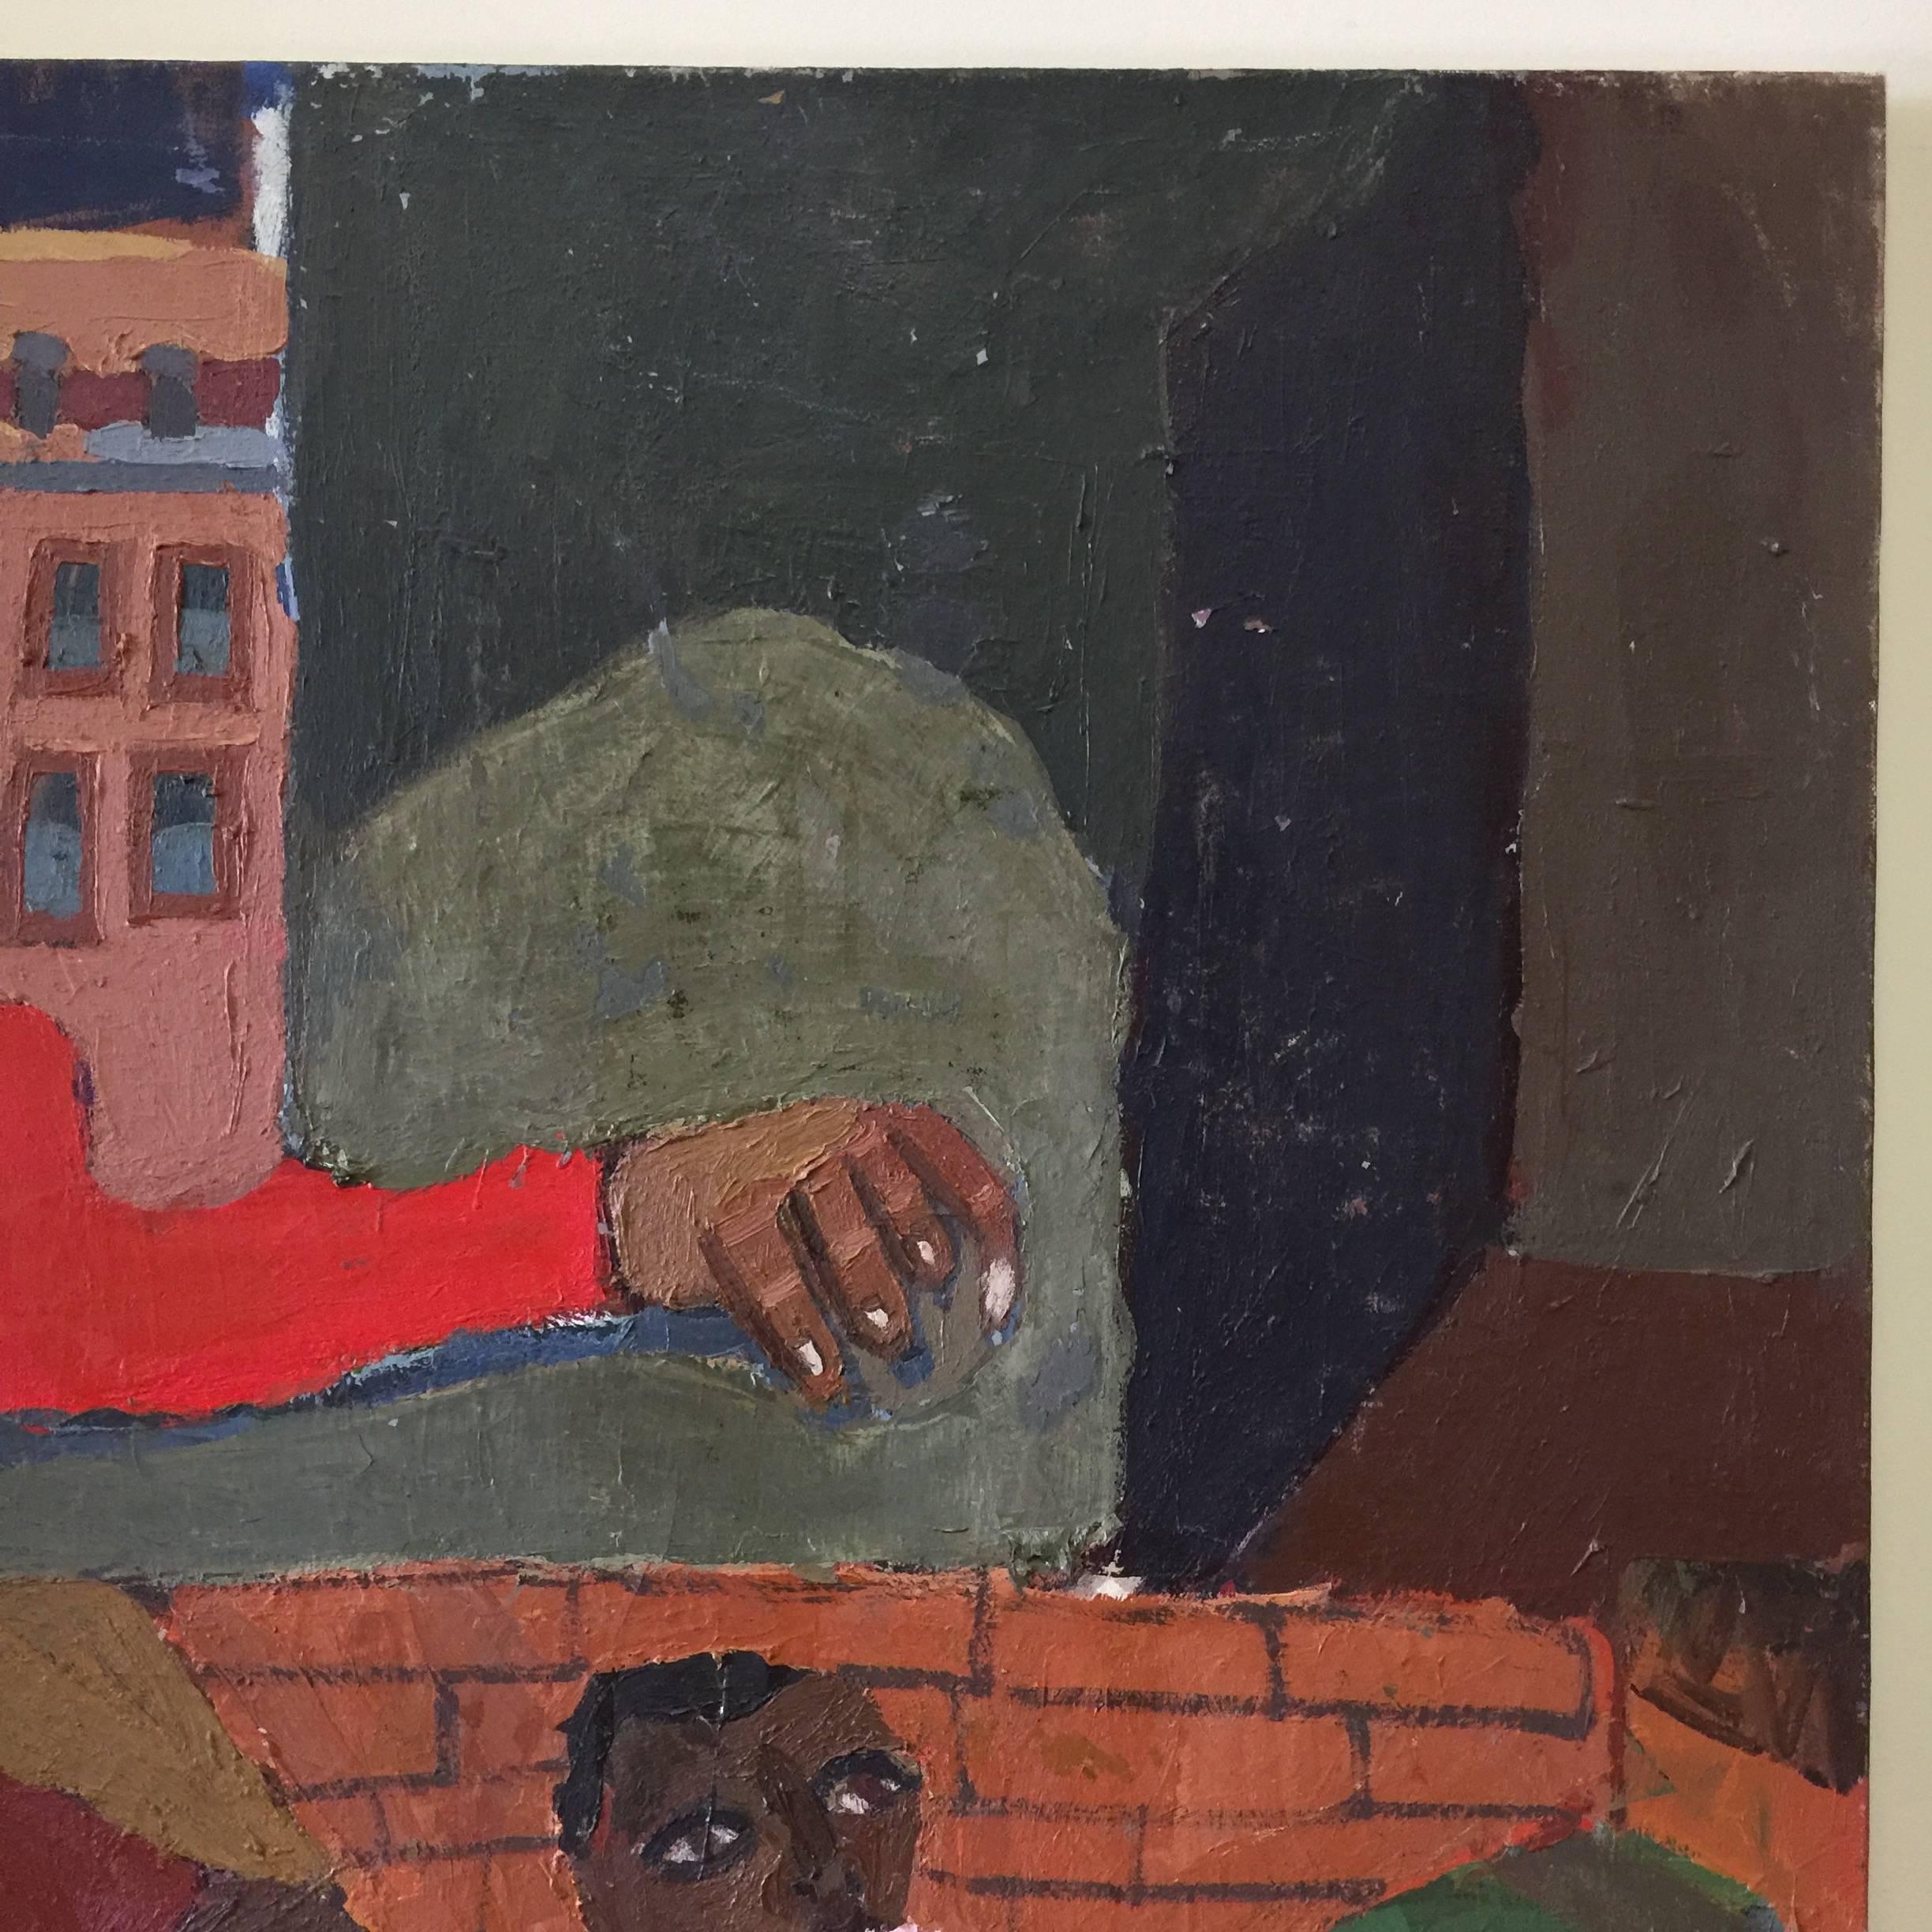 American Feeling Displaced in Harlem Painting by New York City Artist Clintel Steed, 2001 For Sale